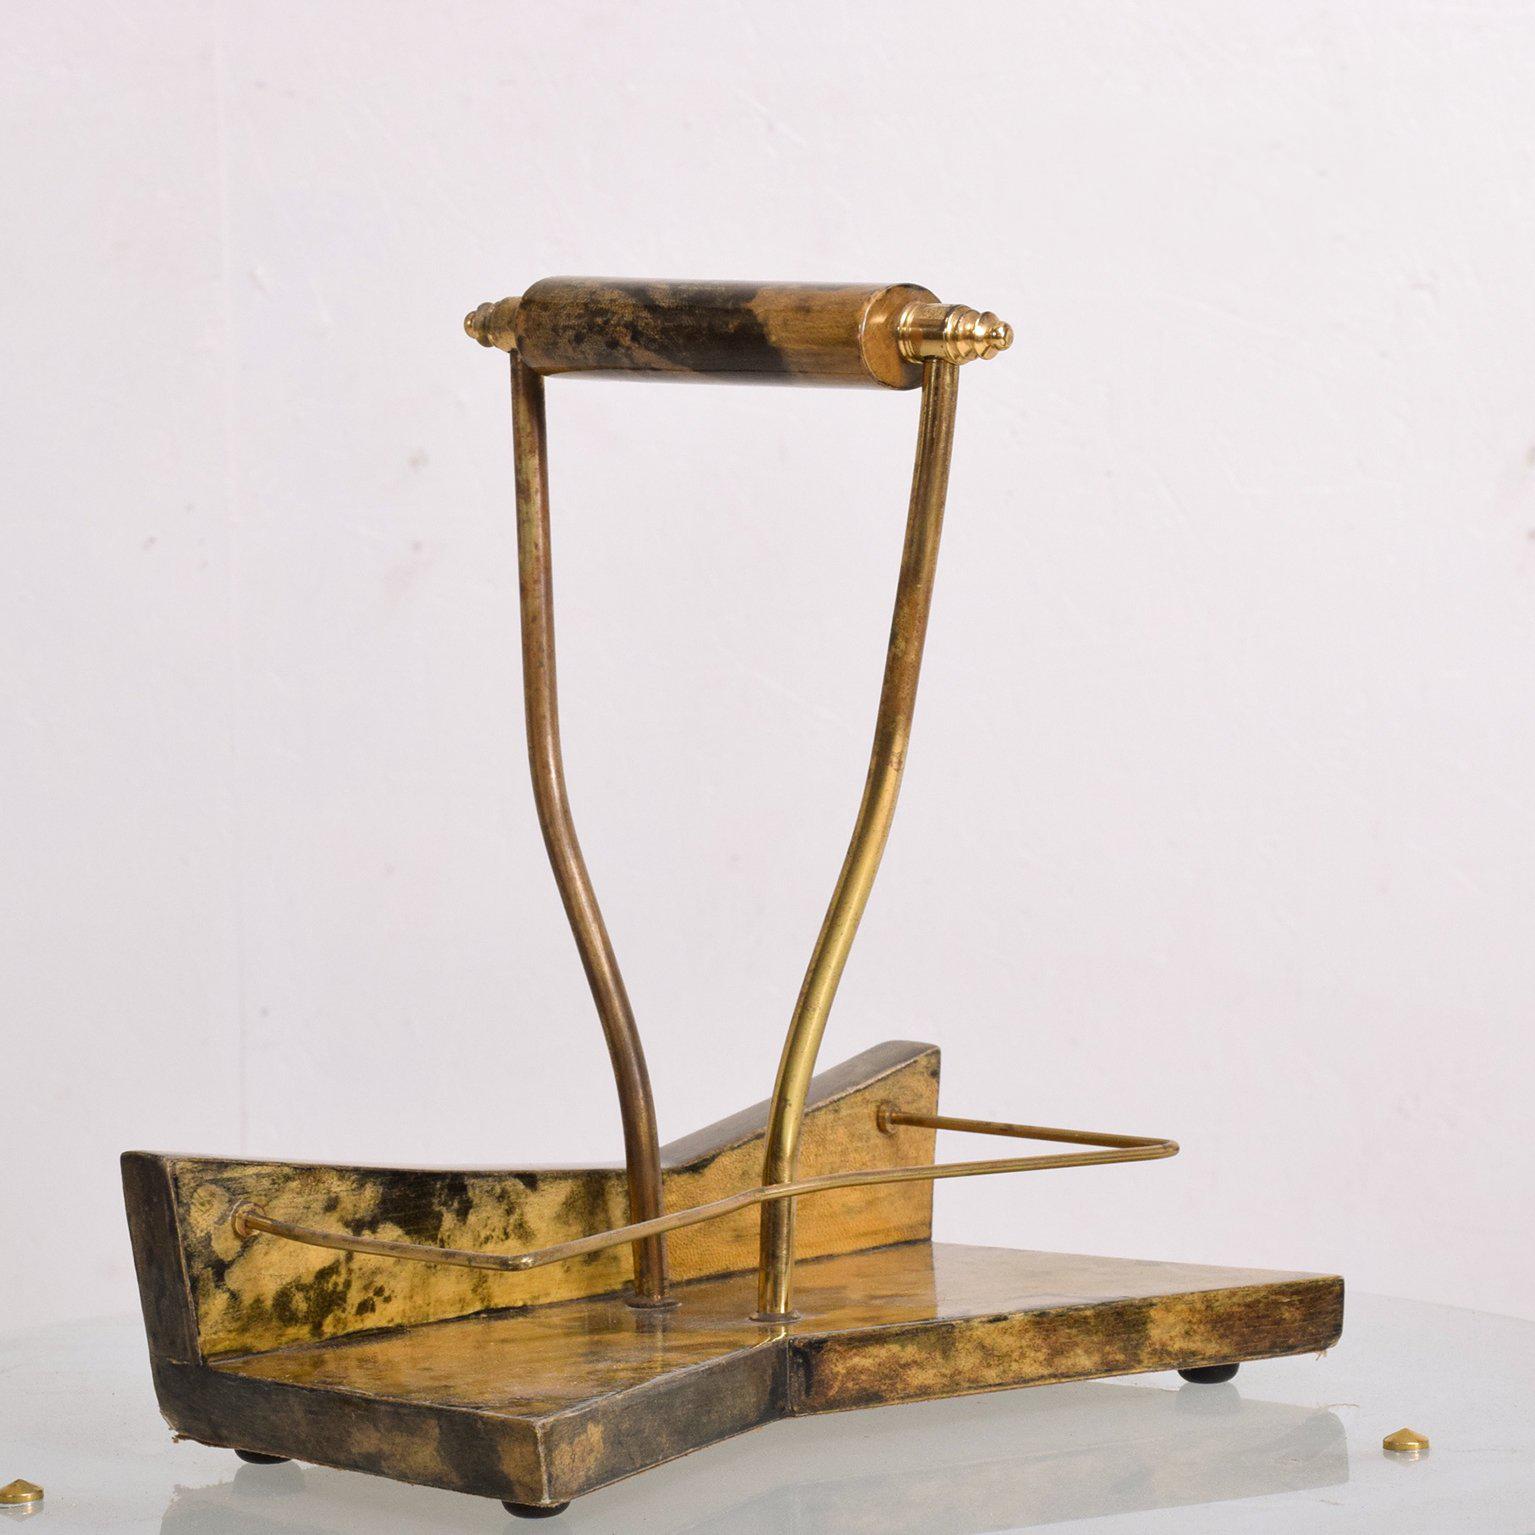 Mid-20th Century Bottle Holder in Goatskin and Brass, after Aldo Tura